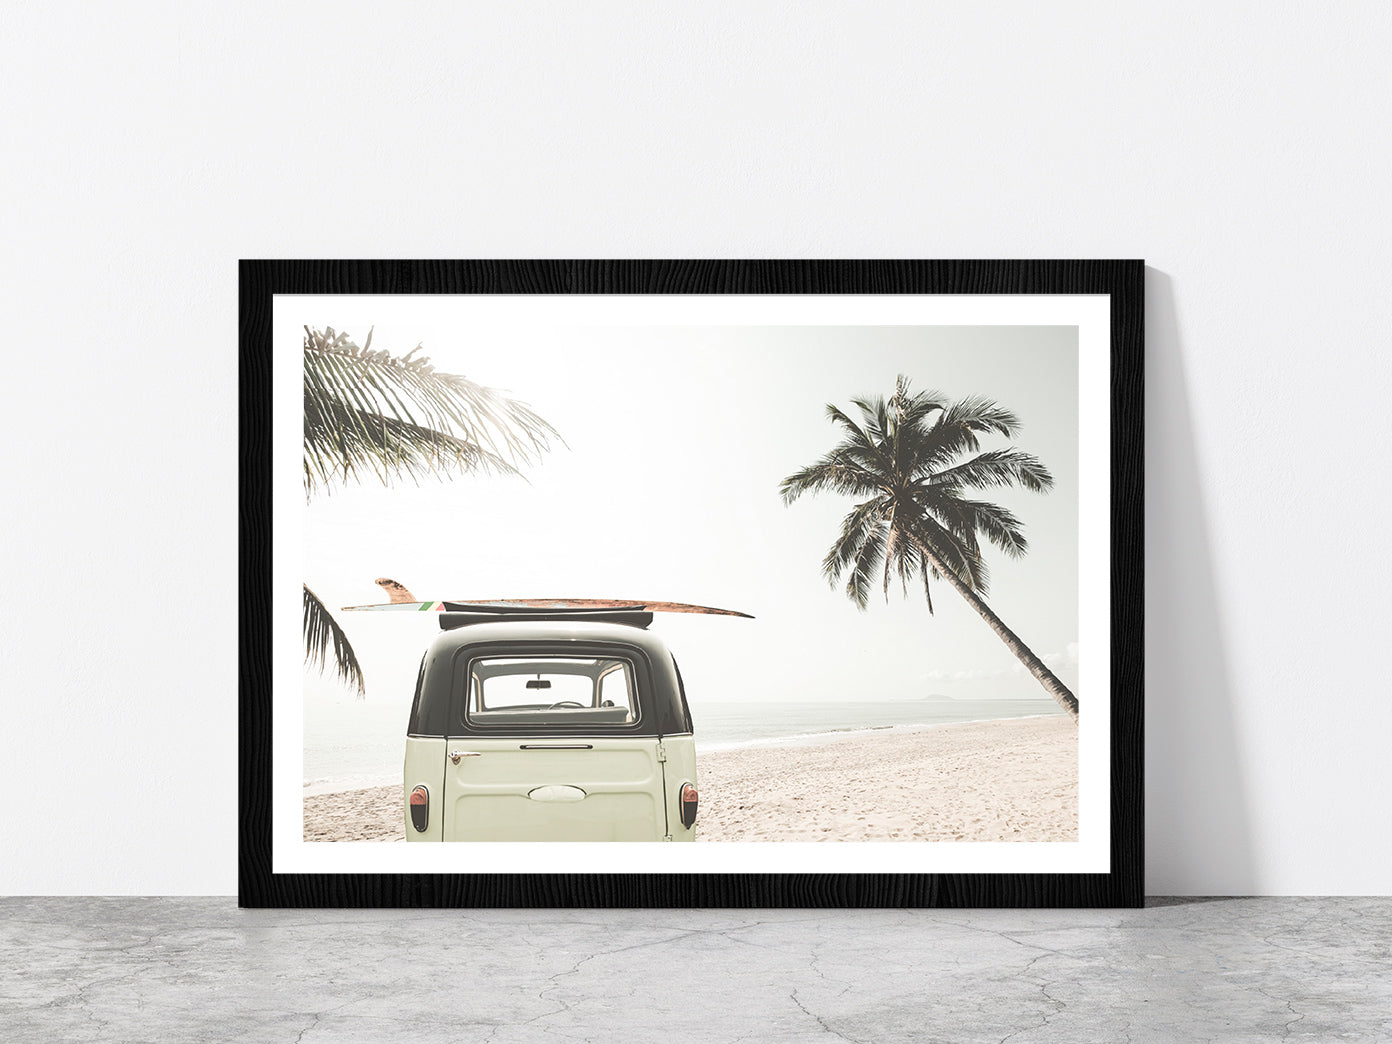 Surf Board on Vintage Van & Palm Tree near Sea Glass Framed Wall Art, Ready to Hang Quality Print With White Border Black